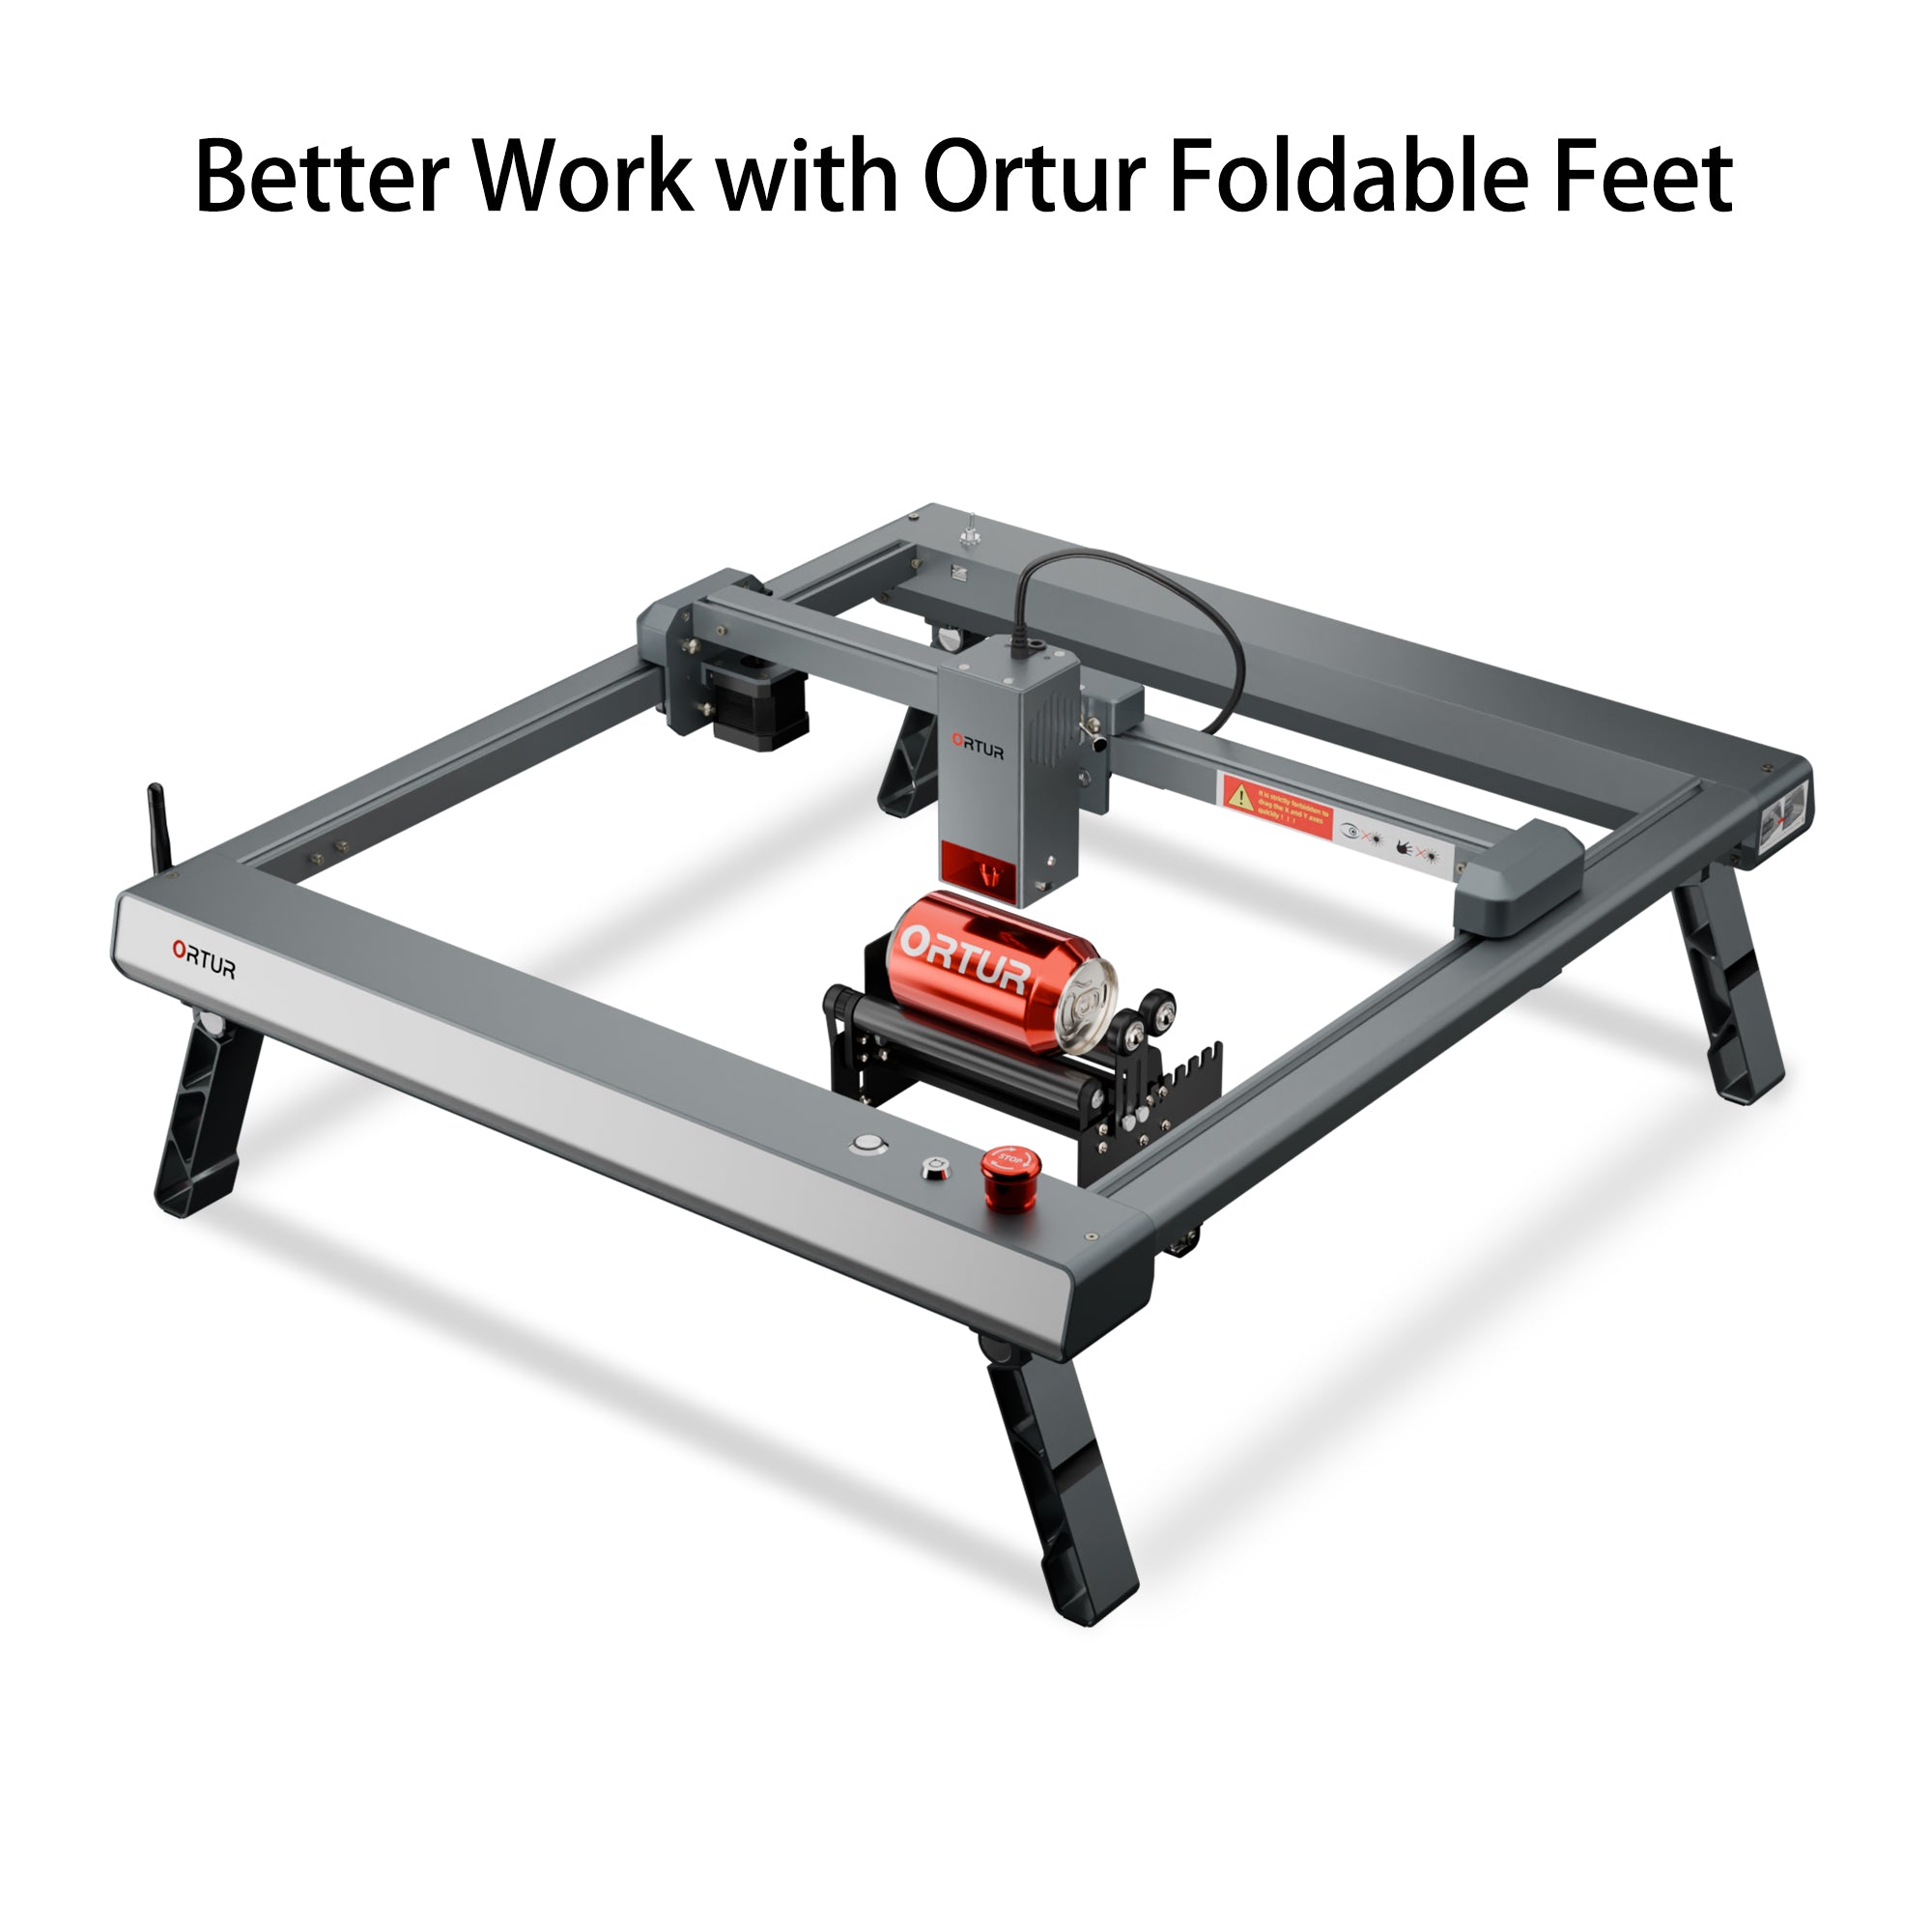 Ortur Foldable Feet for Laser Master 3 Series (FFT1.0)